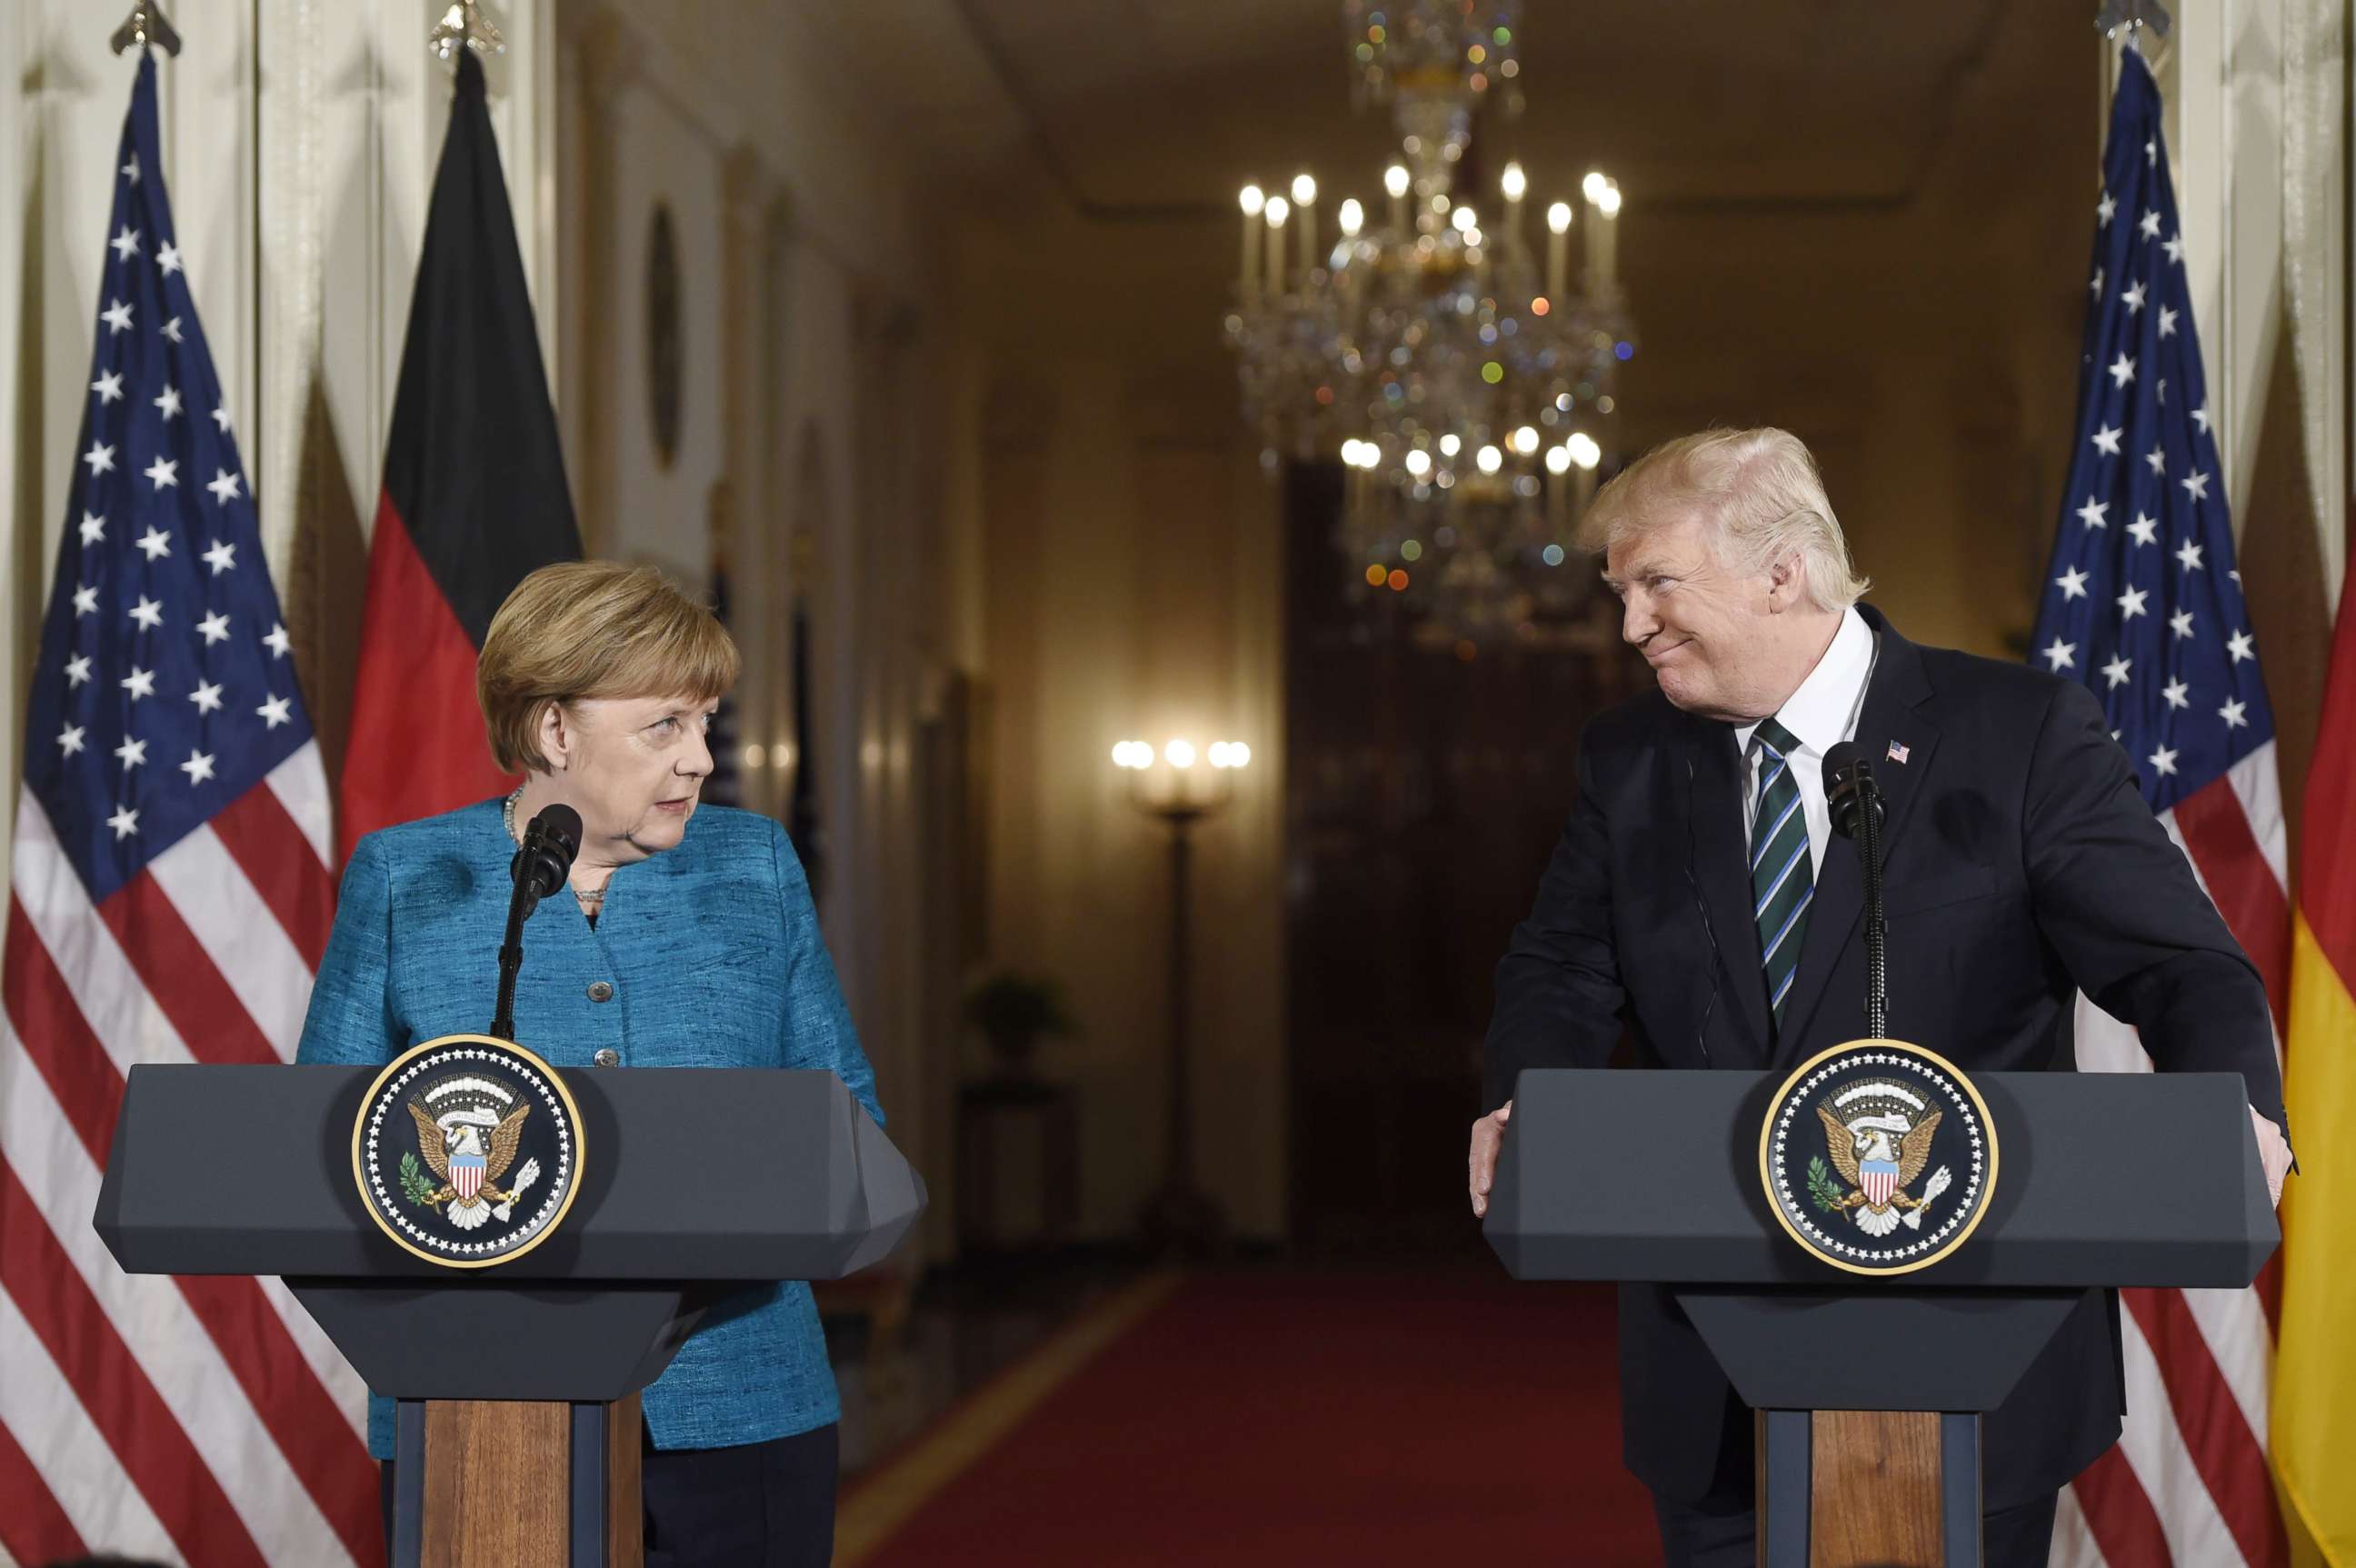 PHOTO: German Chancellor Angela Merkel and President Donald Trump hold a joint press conference in the East Room of the White House in Washington in this March 17, 2017 file photo.